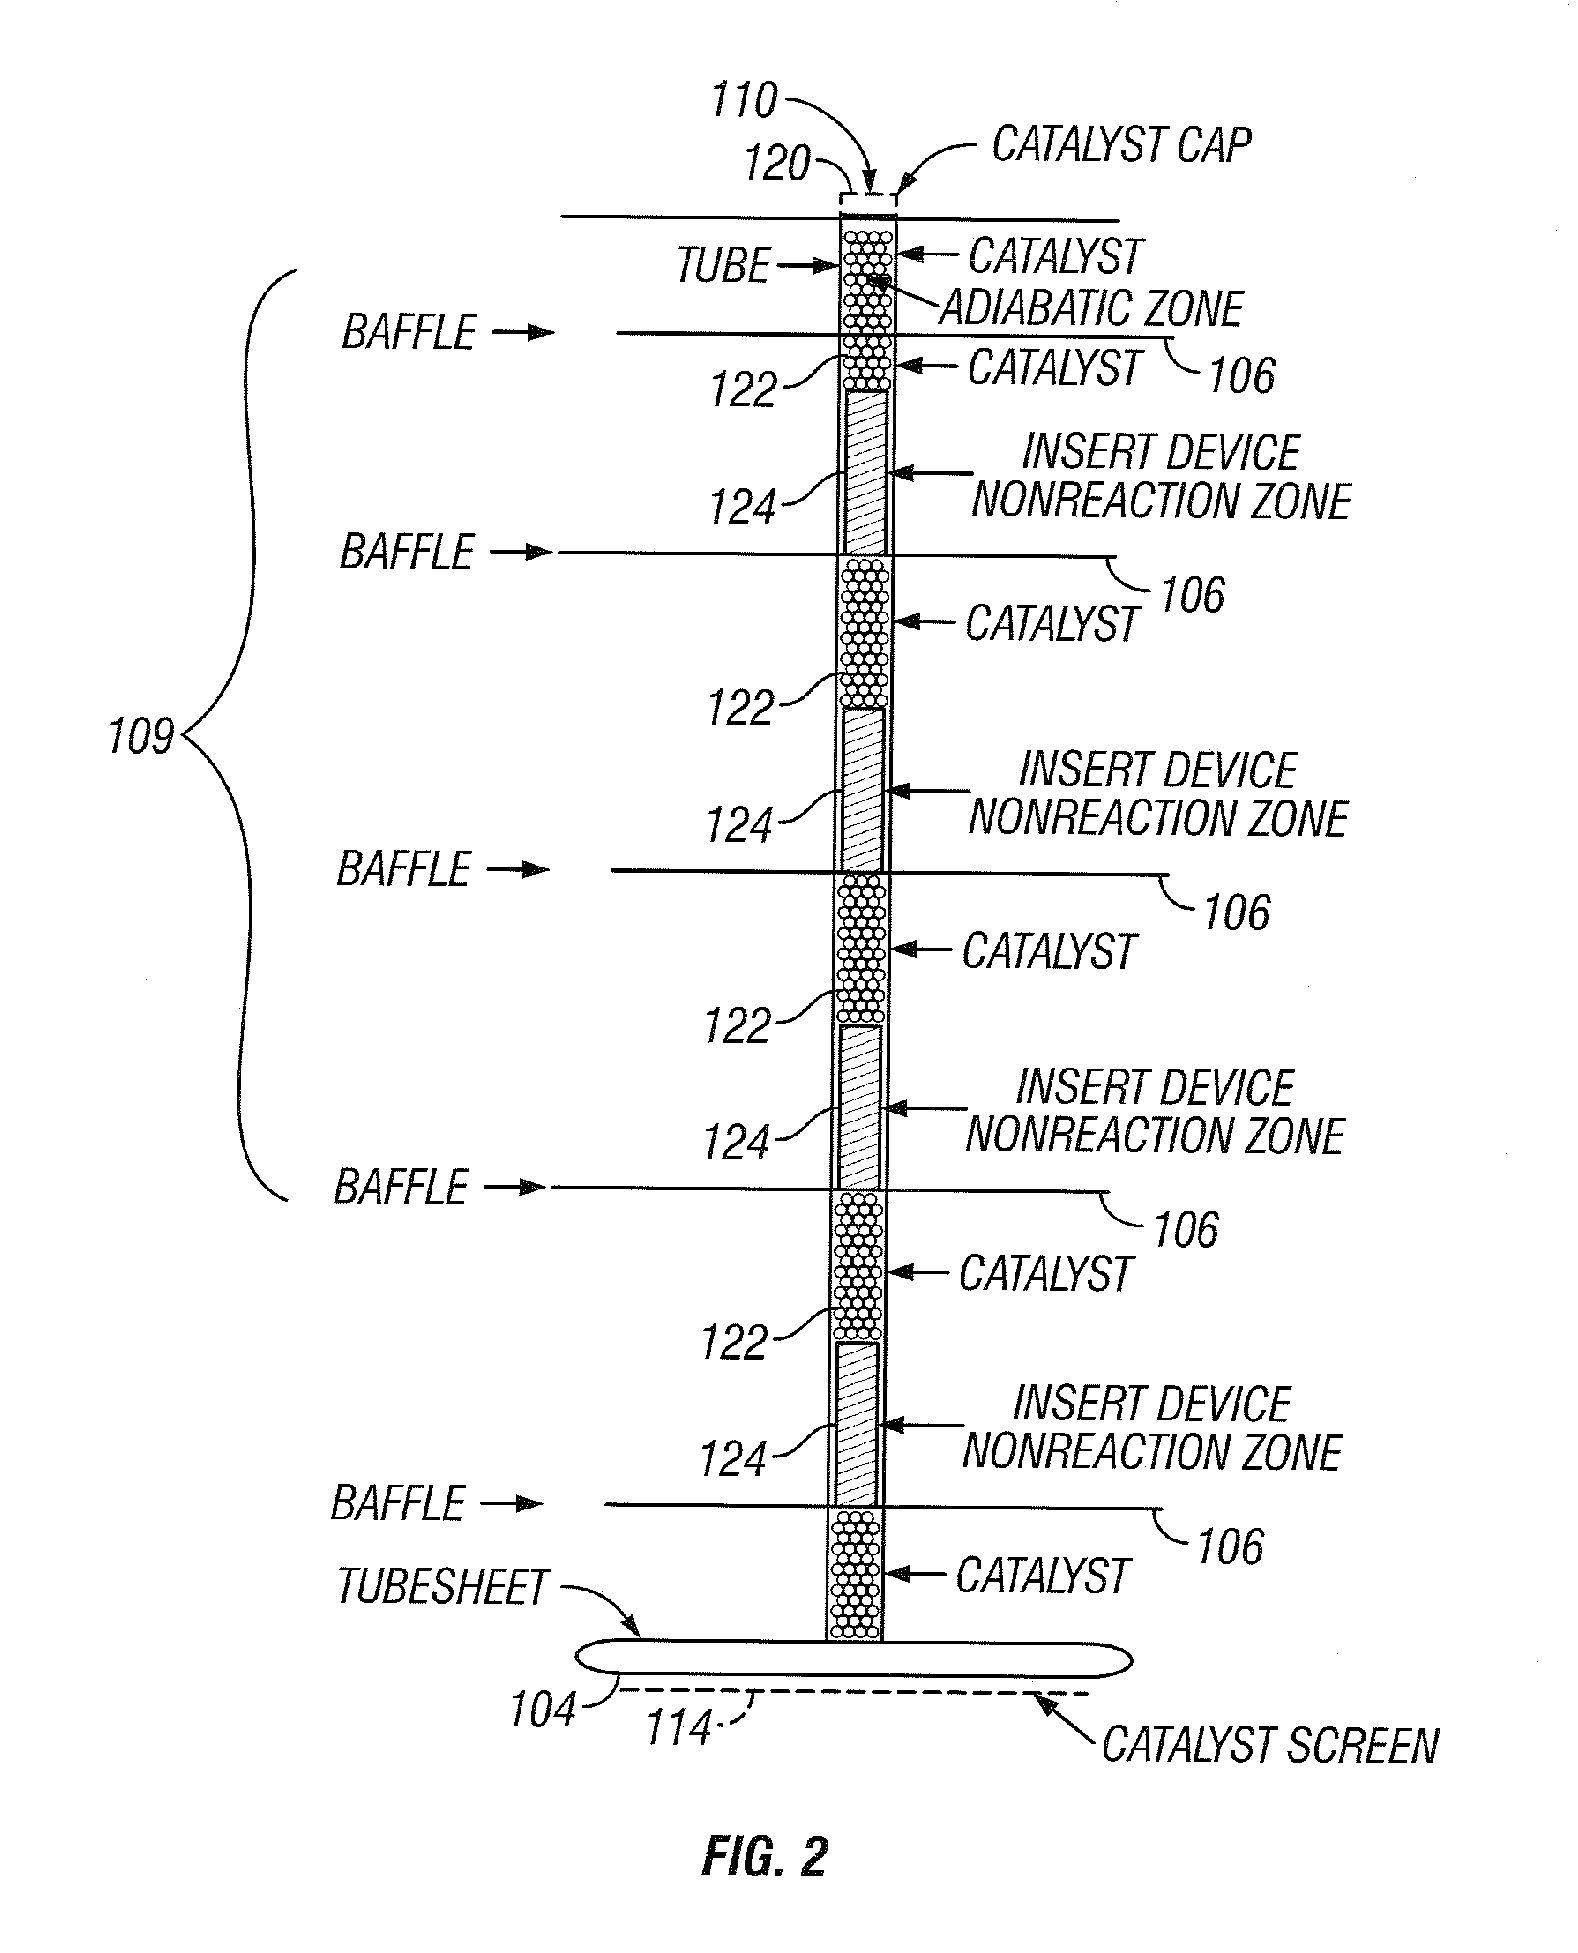 Maximum reaction rate converter system for exothermic reactions